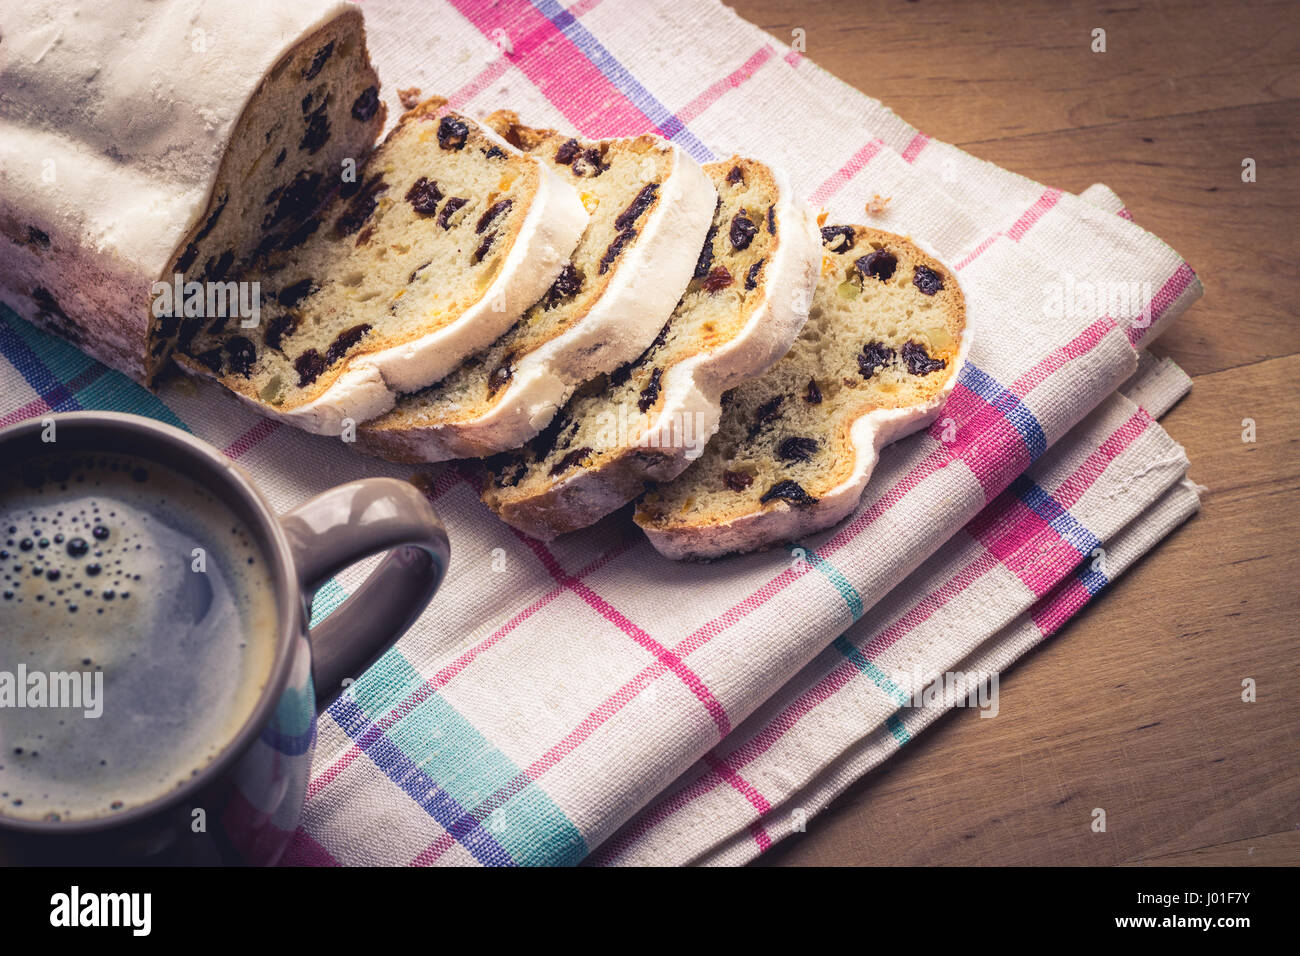 Stollen, traditional German Christmas yeast cake with raisins served with a cup of coffee, decorated with tablecloth on wooden table Stock Photo